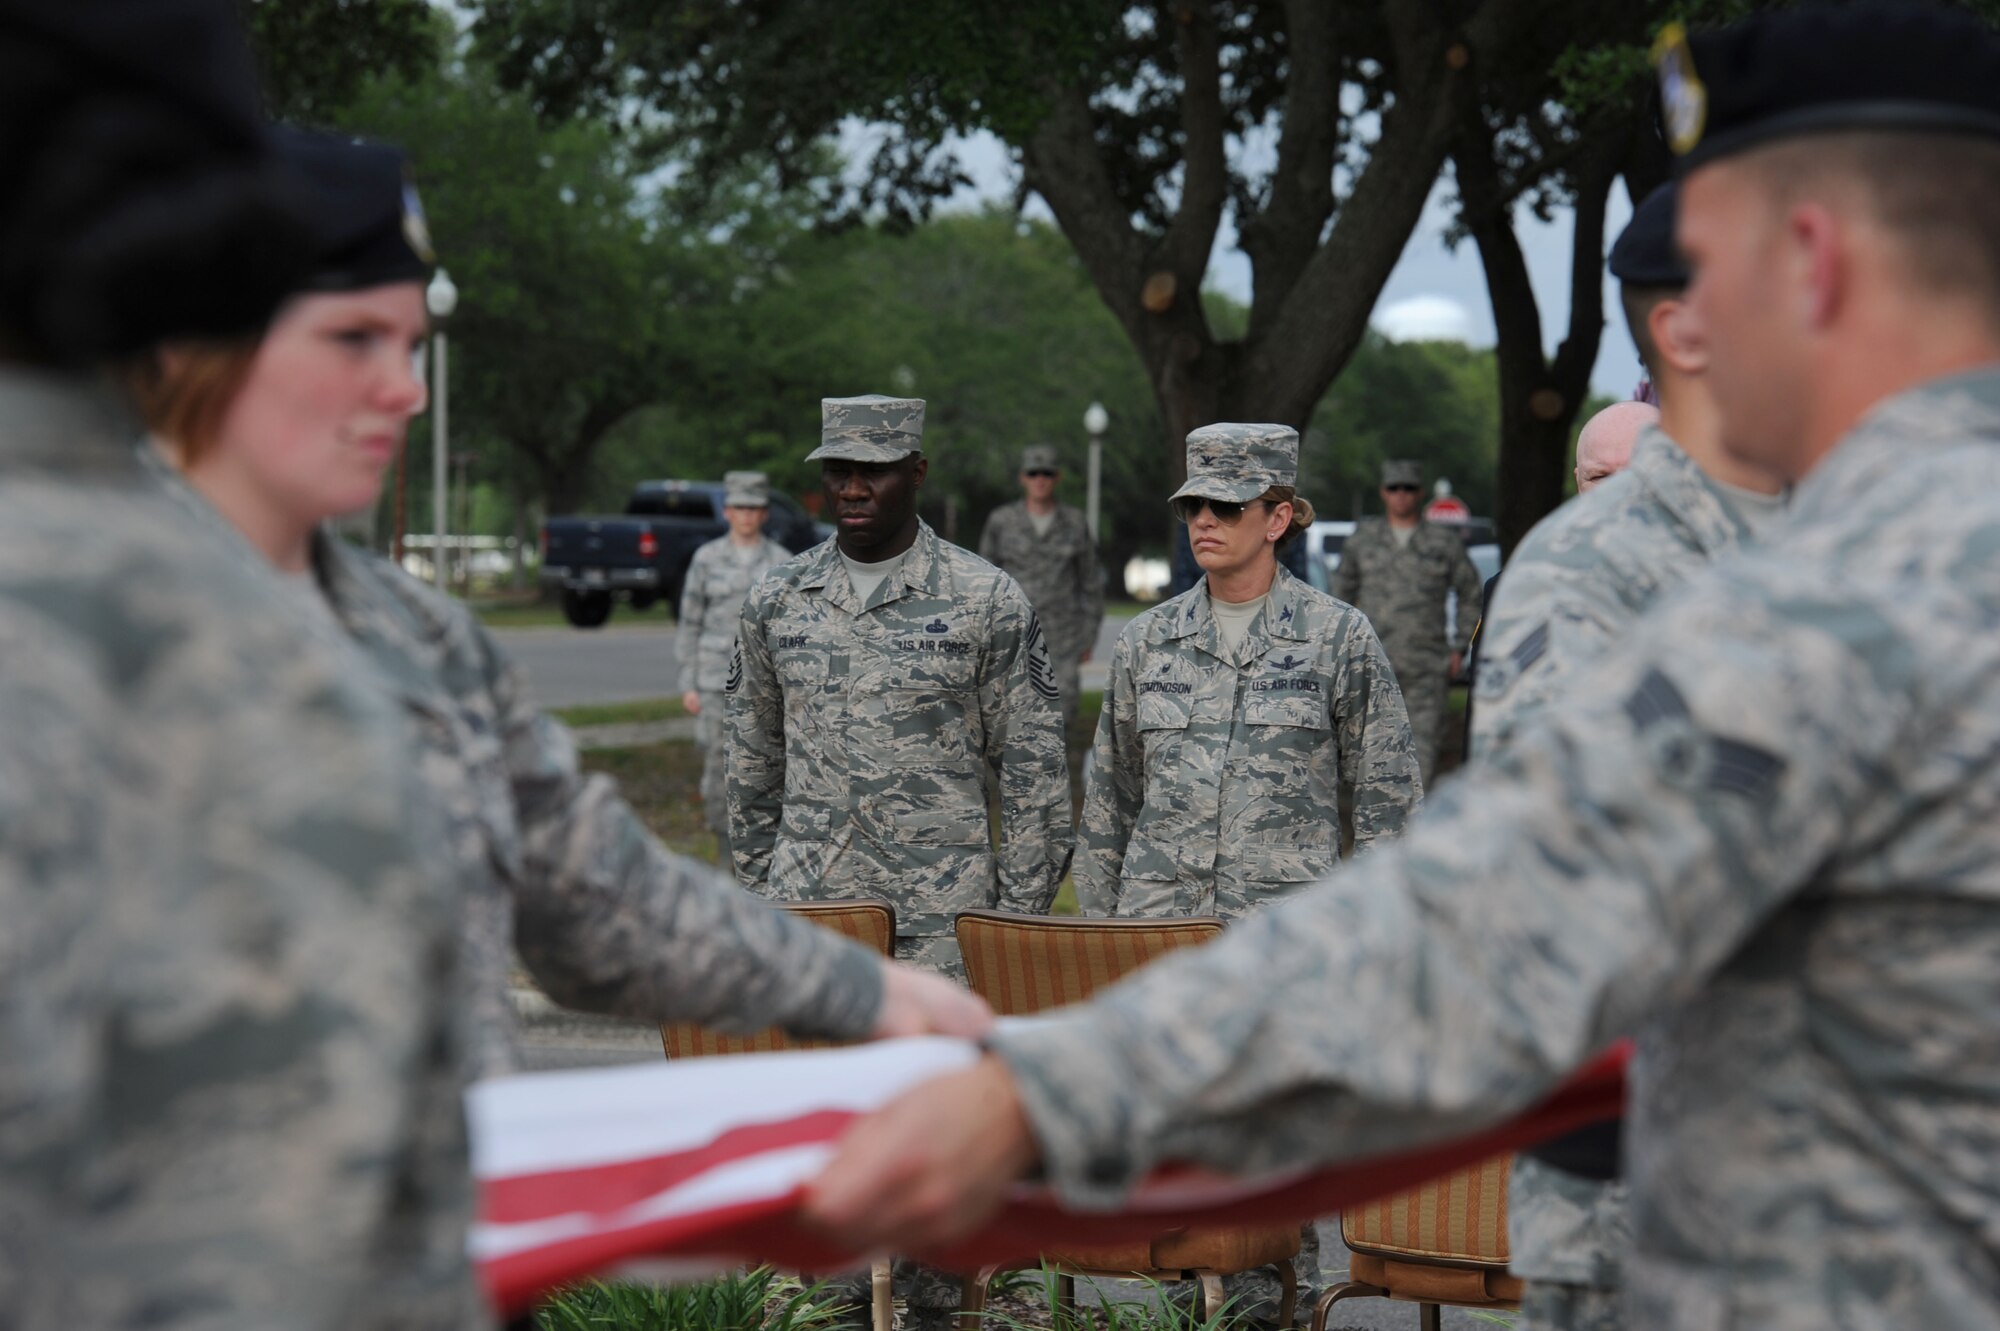 Col. Michele Edmondson, 81st Training Wing commander, and Chief Master Sgt. Vegas Clark, 81st TRW command chief, stand at attention during the 81st Security Forces Squadron retreat ceremony May 18, 2017, on Keesler Air Force Base, Miss. The event was held during National Police Week, which recognizes the service of law enforcement men and women who put their lives at risk every day. (U.S. Air Force photo by Kemberly Groue)